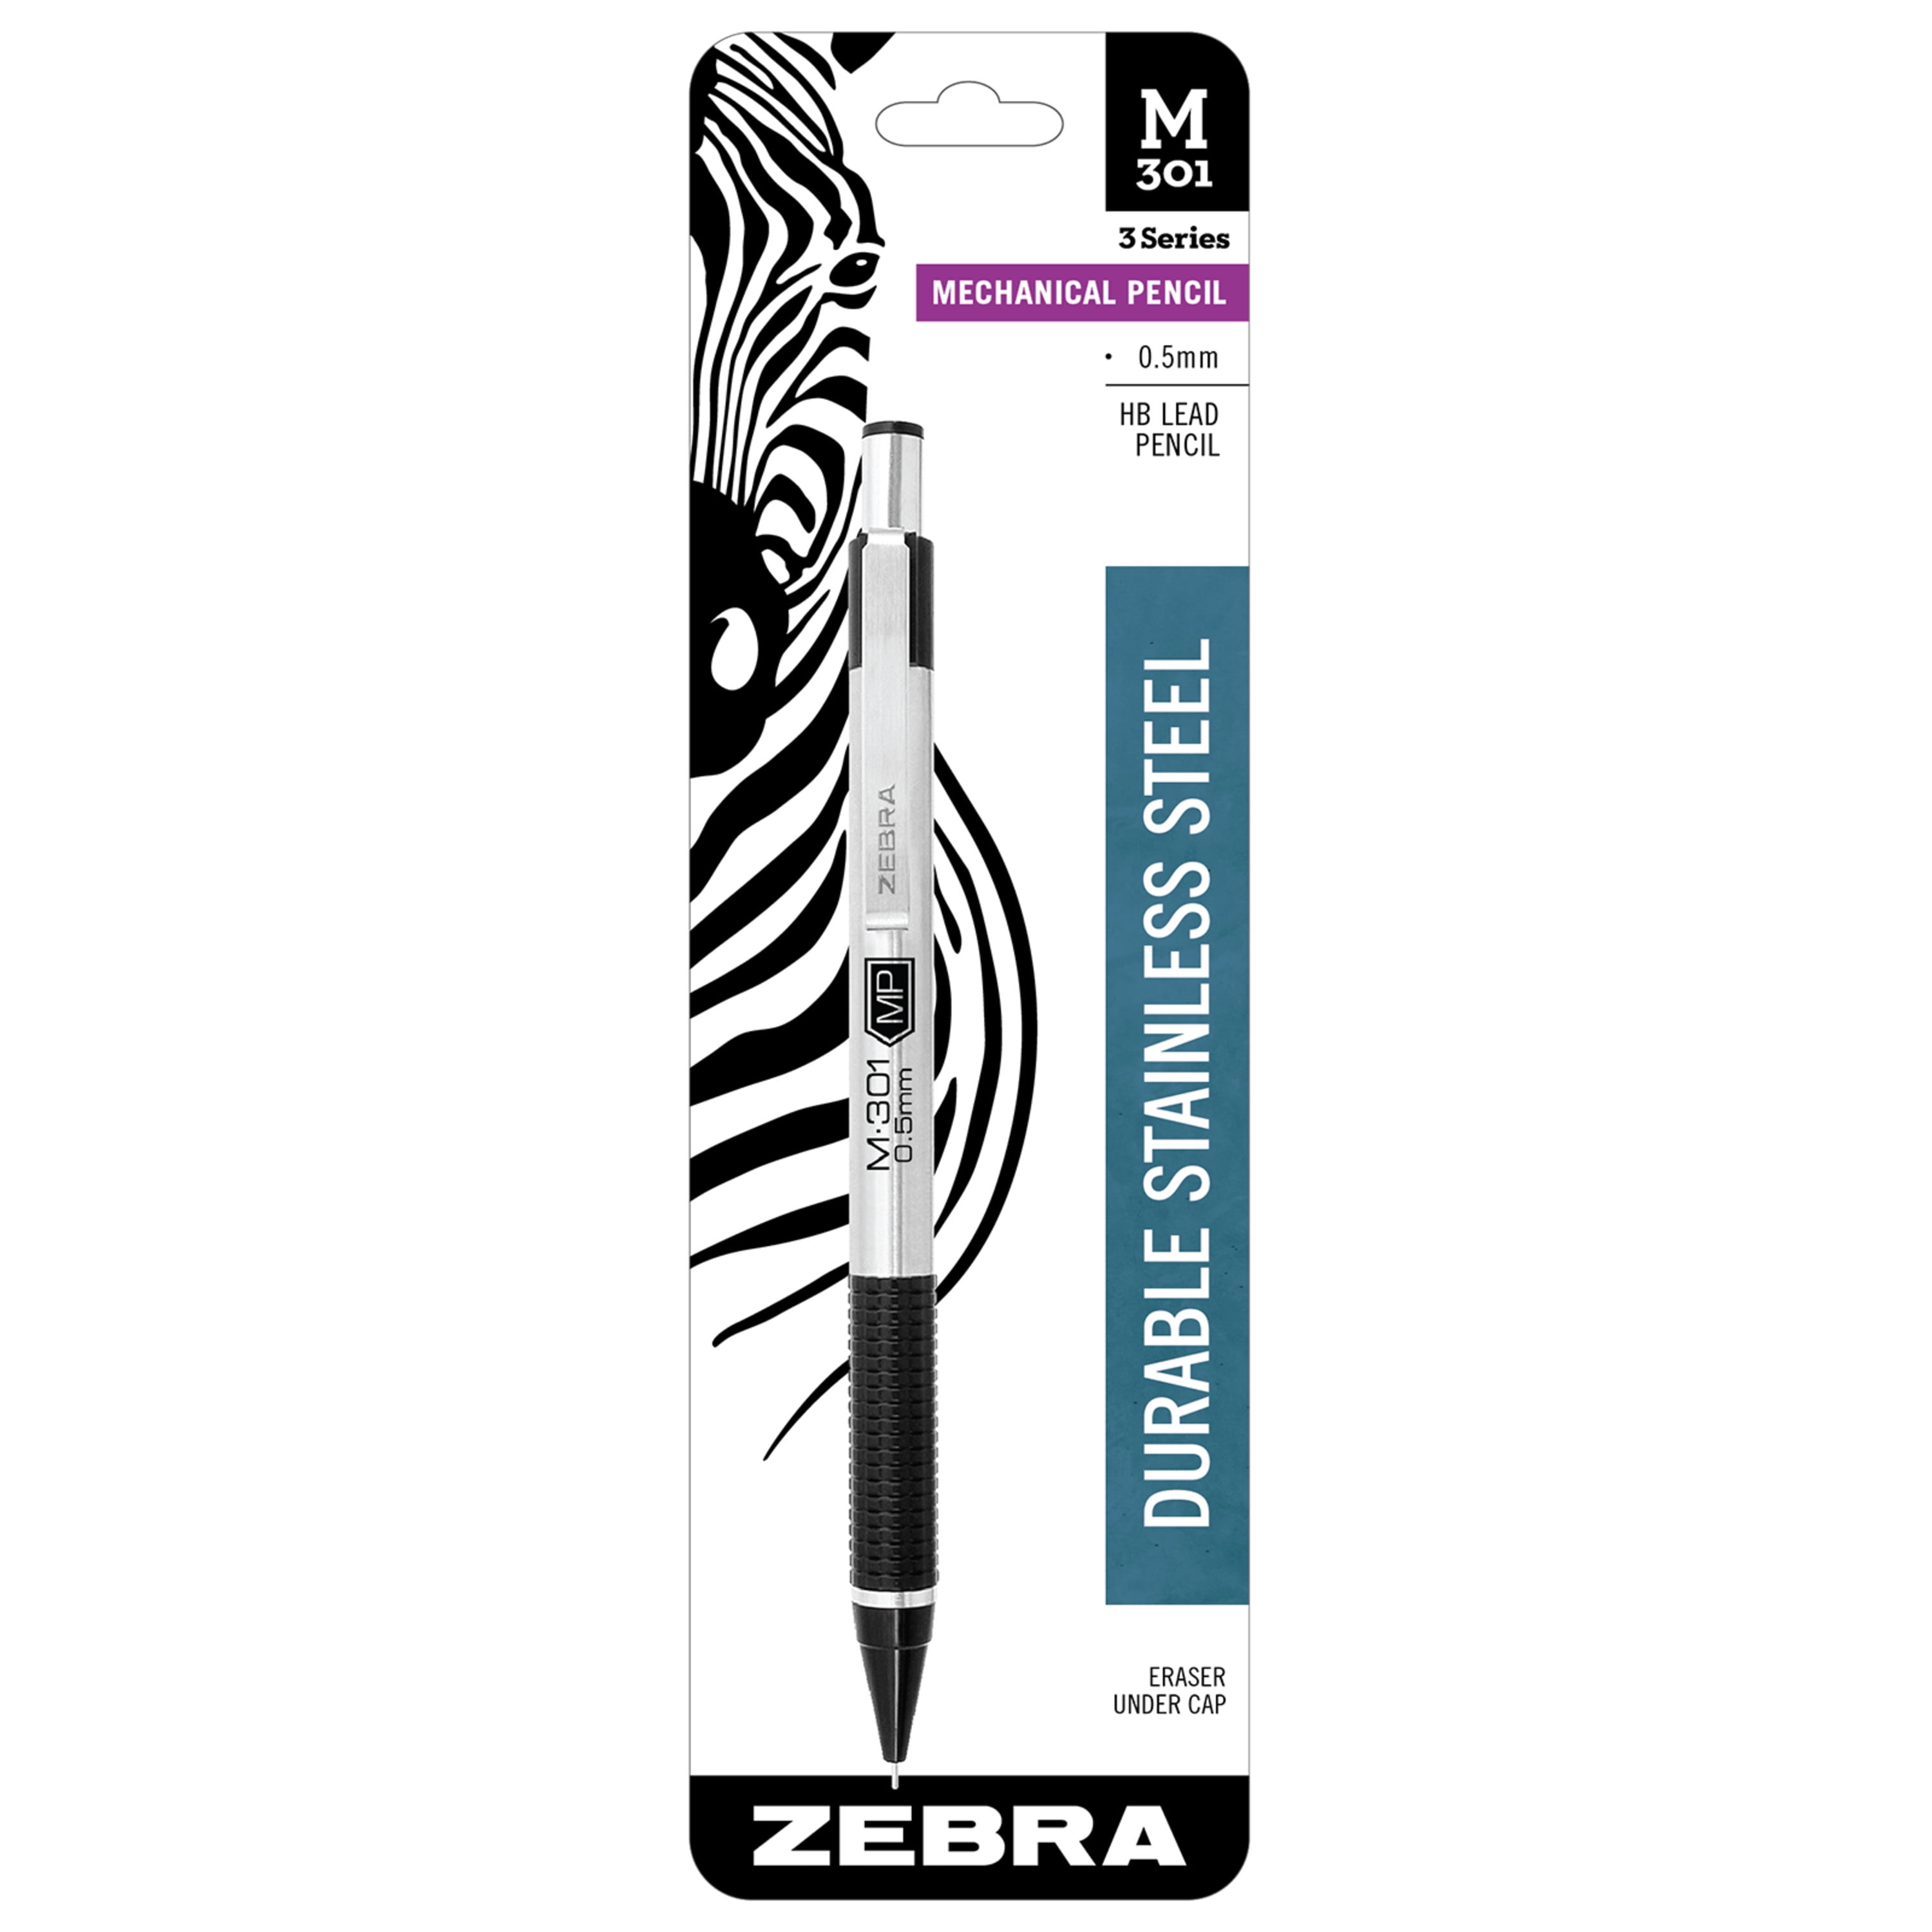 Zebra Mechanical Pencil M301 0.5mm HB Lead Durable Stainless Steel 2pk for sale online 